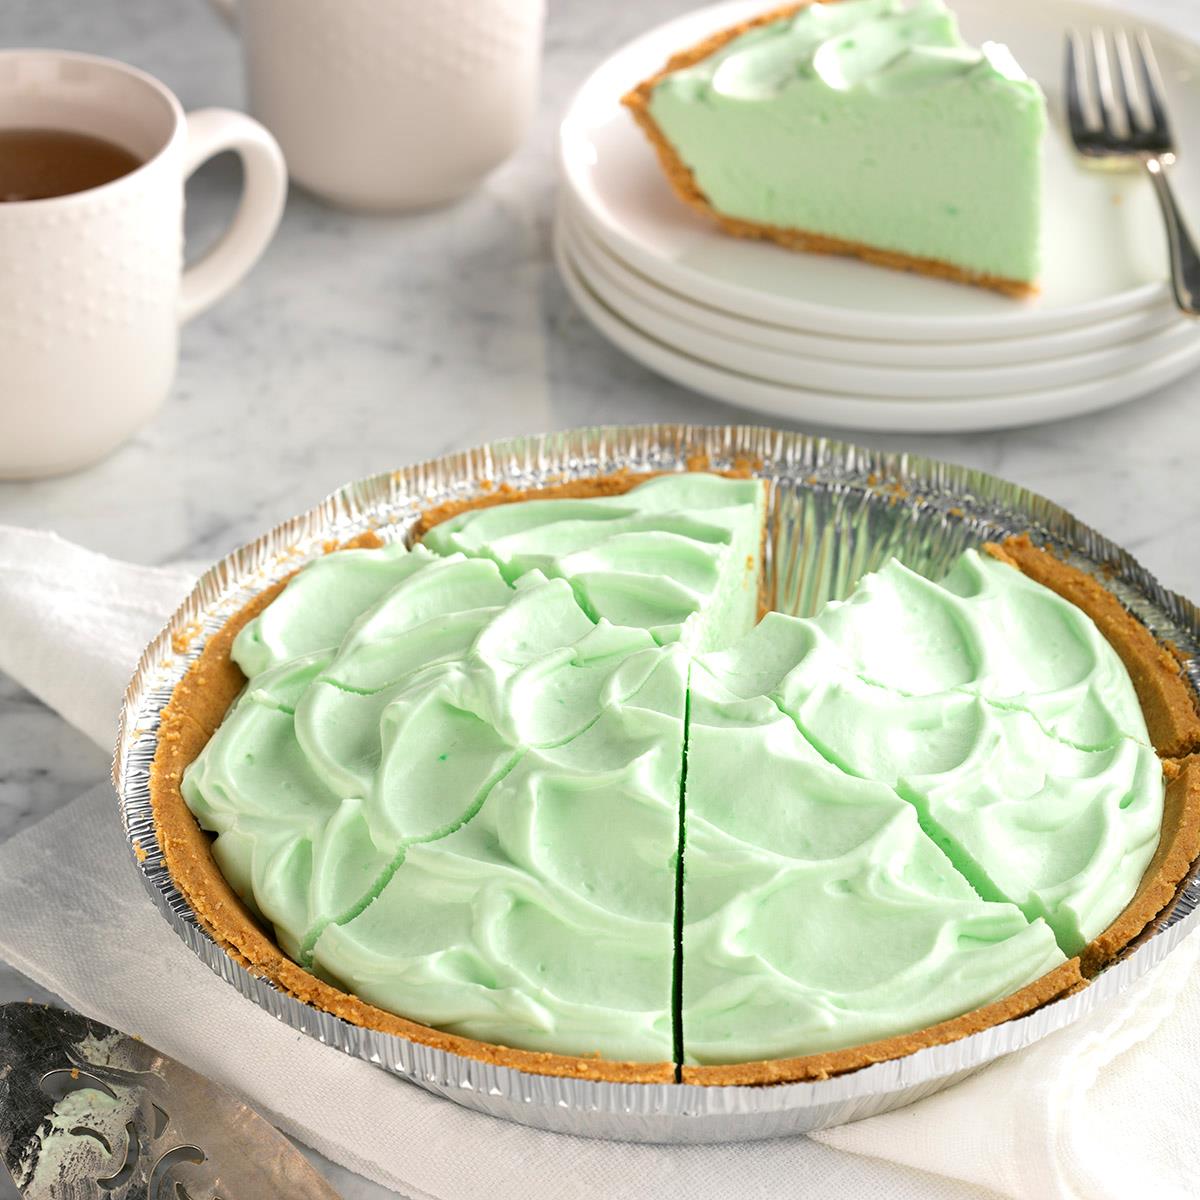 What Cake Matches Your Vibe? Key lime pie